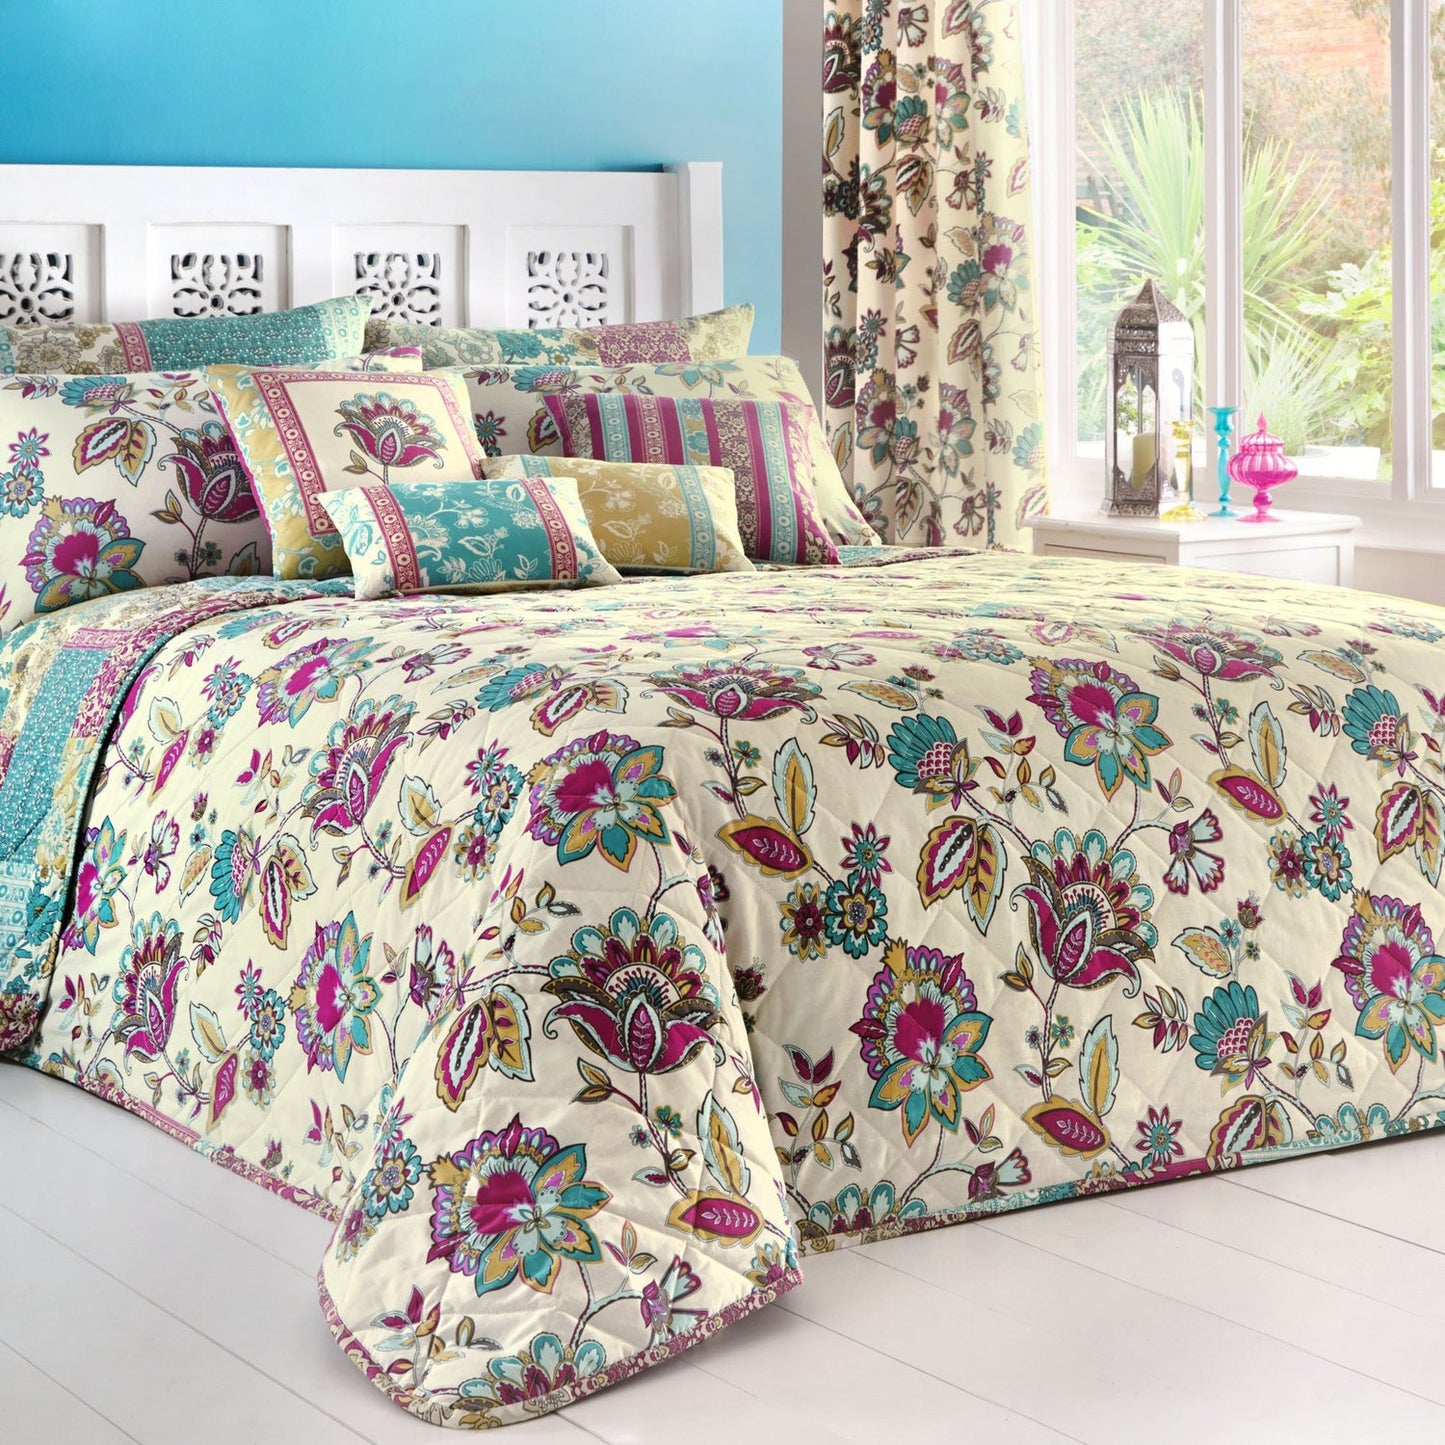 Marinelli Floral Quilted Bedspread